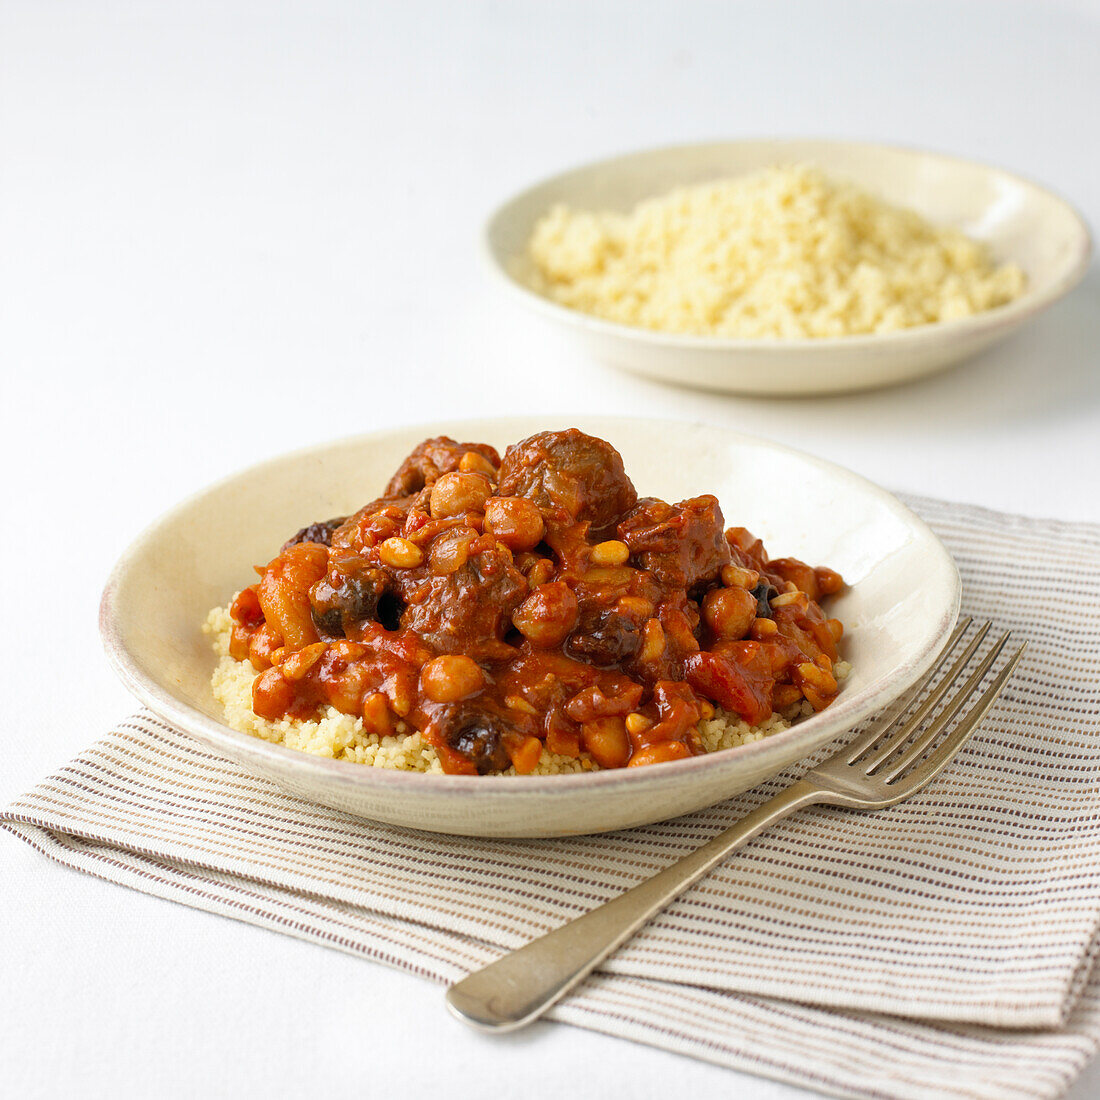 Lamb tagine and couscous